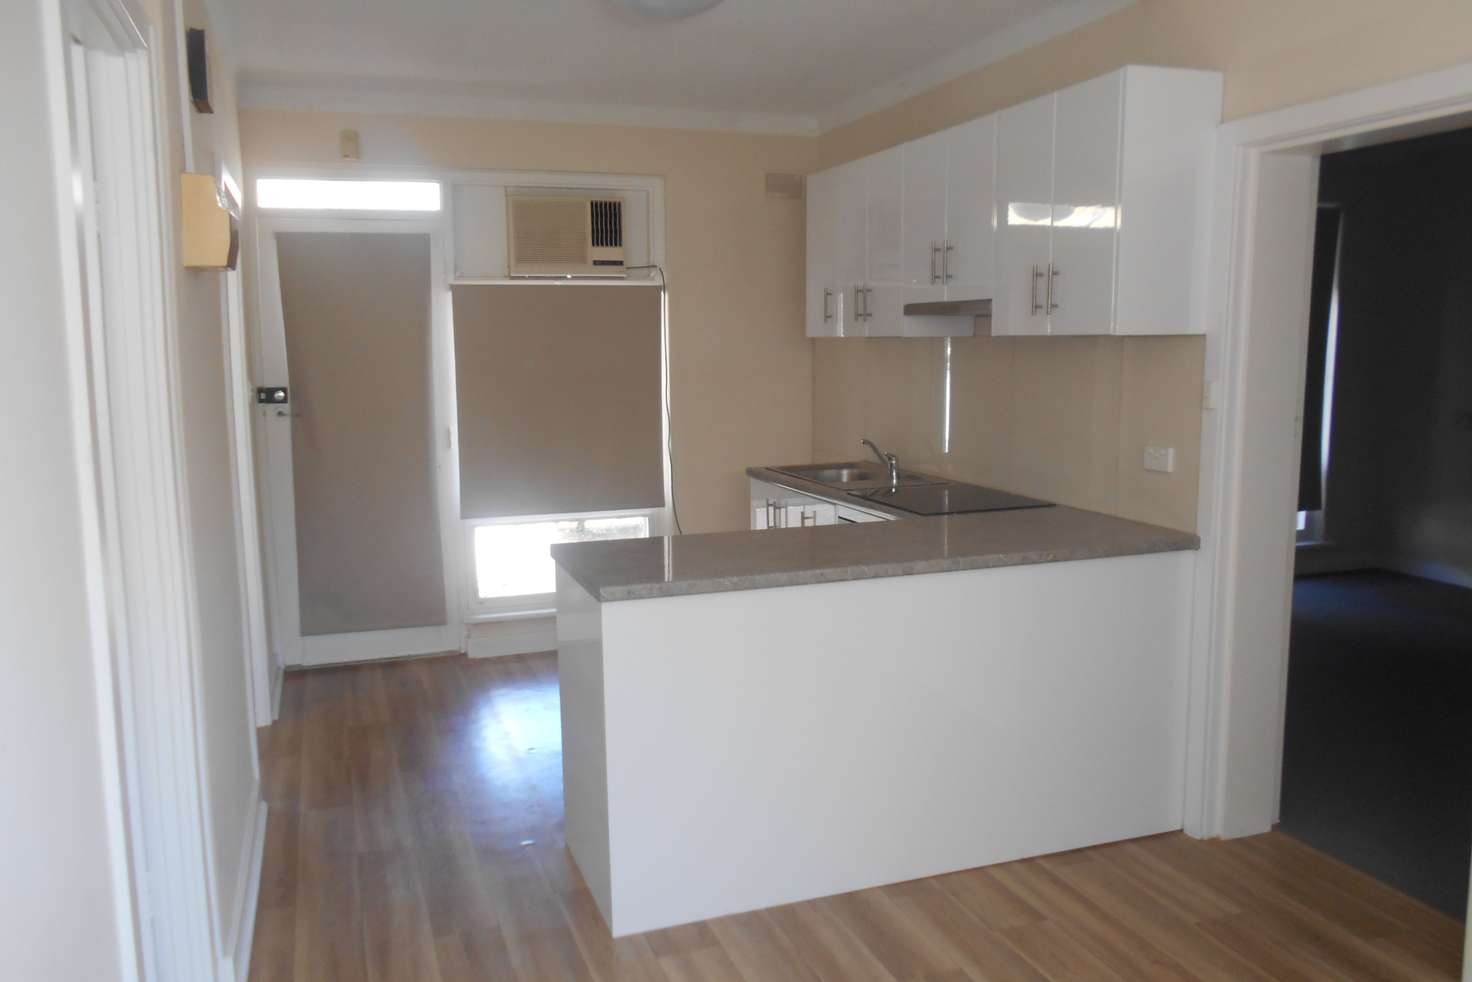 Main view of Homely unit listing, 4/35 Kerrr Grant Tce, Plympton SA 5038